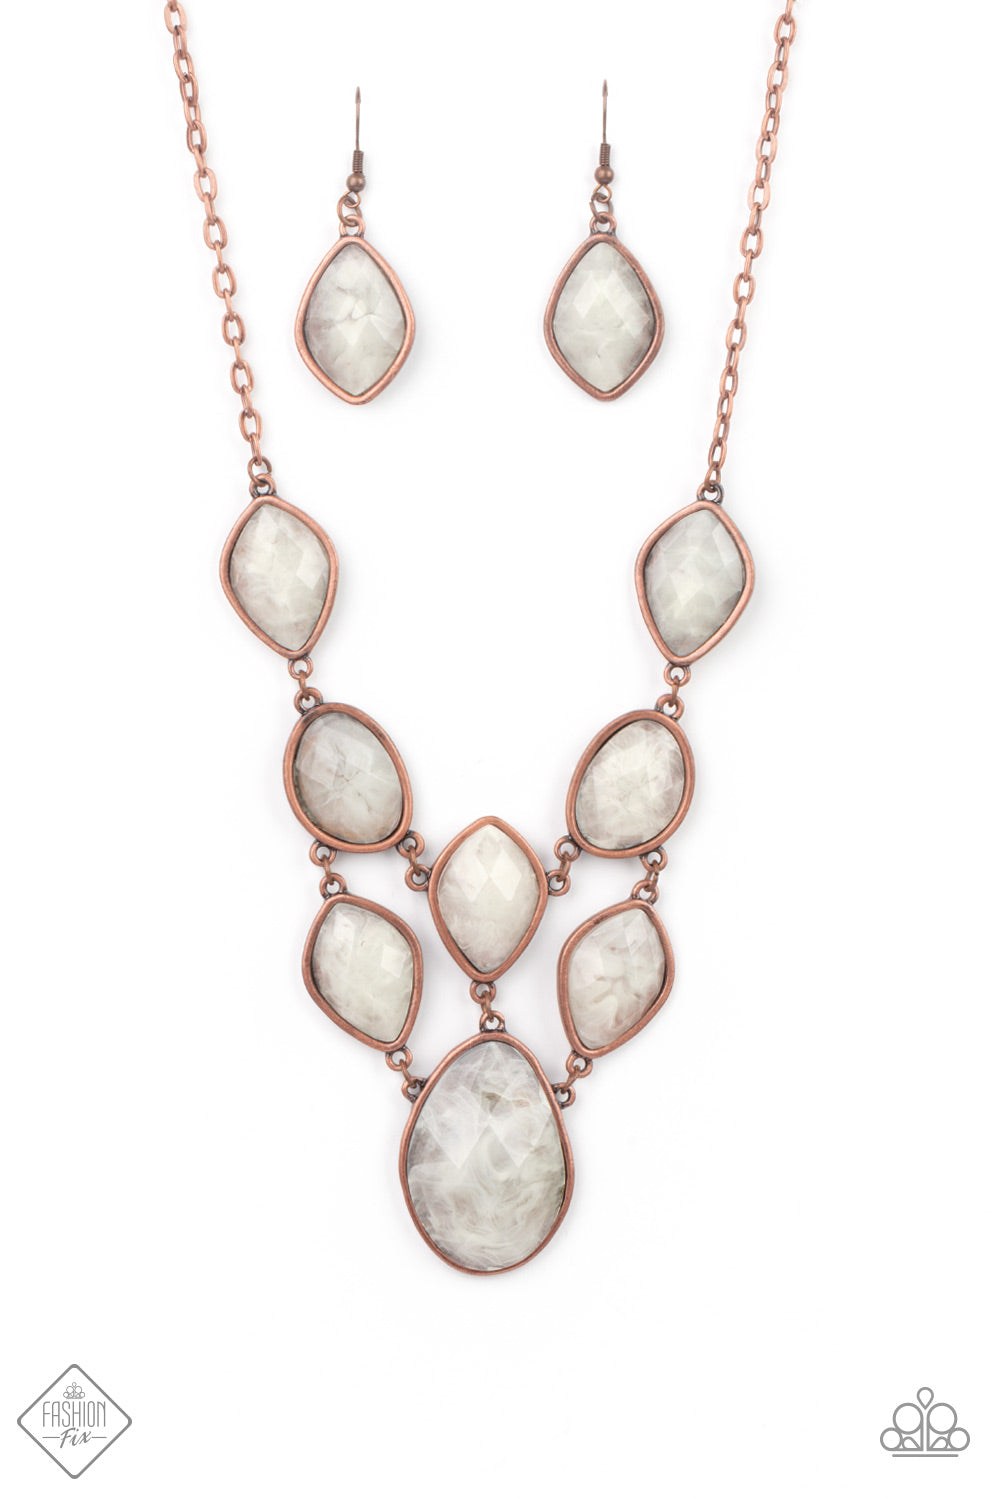 Opulently Oracle - Copper Necklace January Fashion Fix 